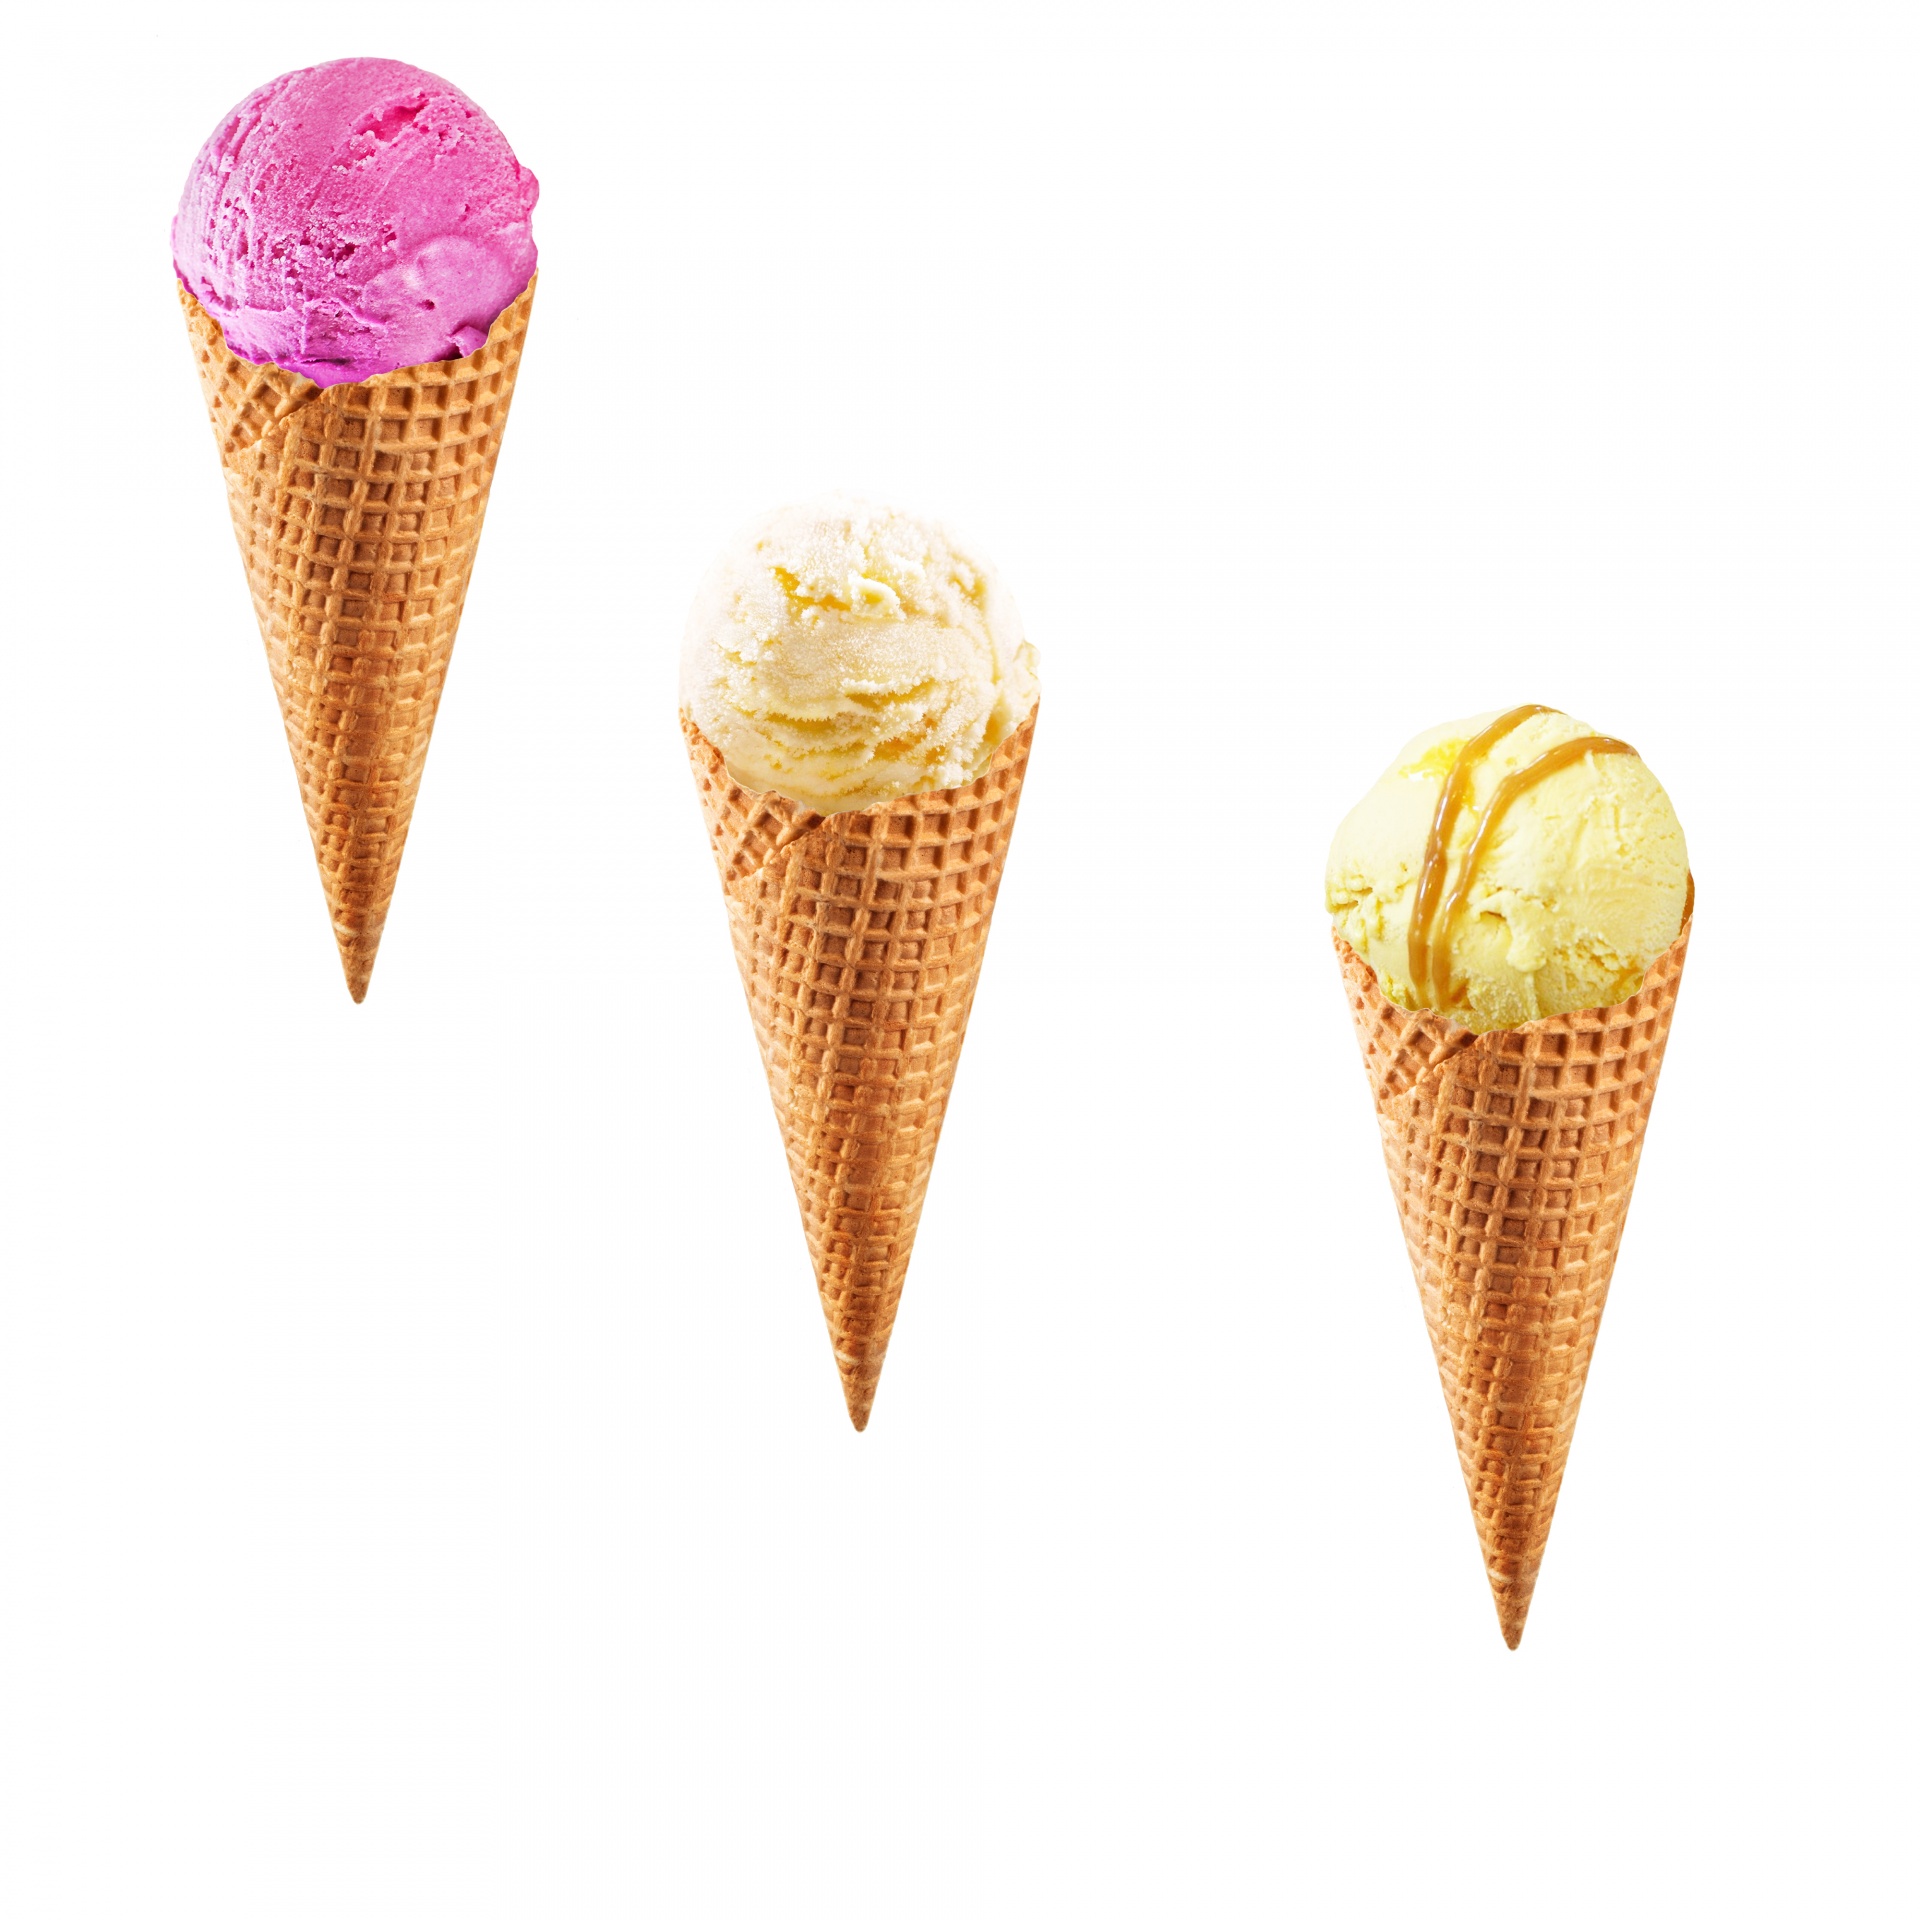 ice-cream-in-a-cone-isolated-free-stock-photo-public-domain-pictures